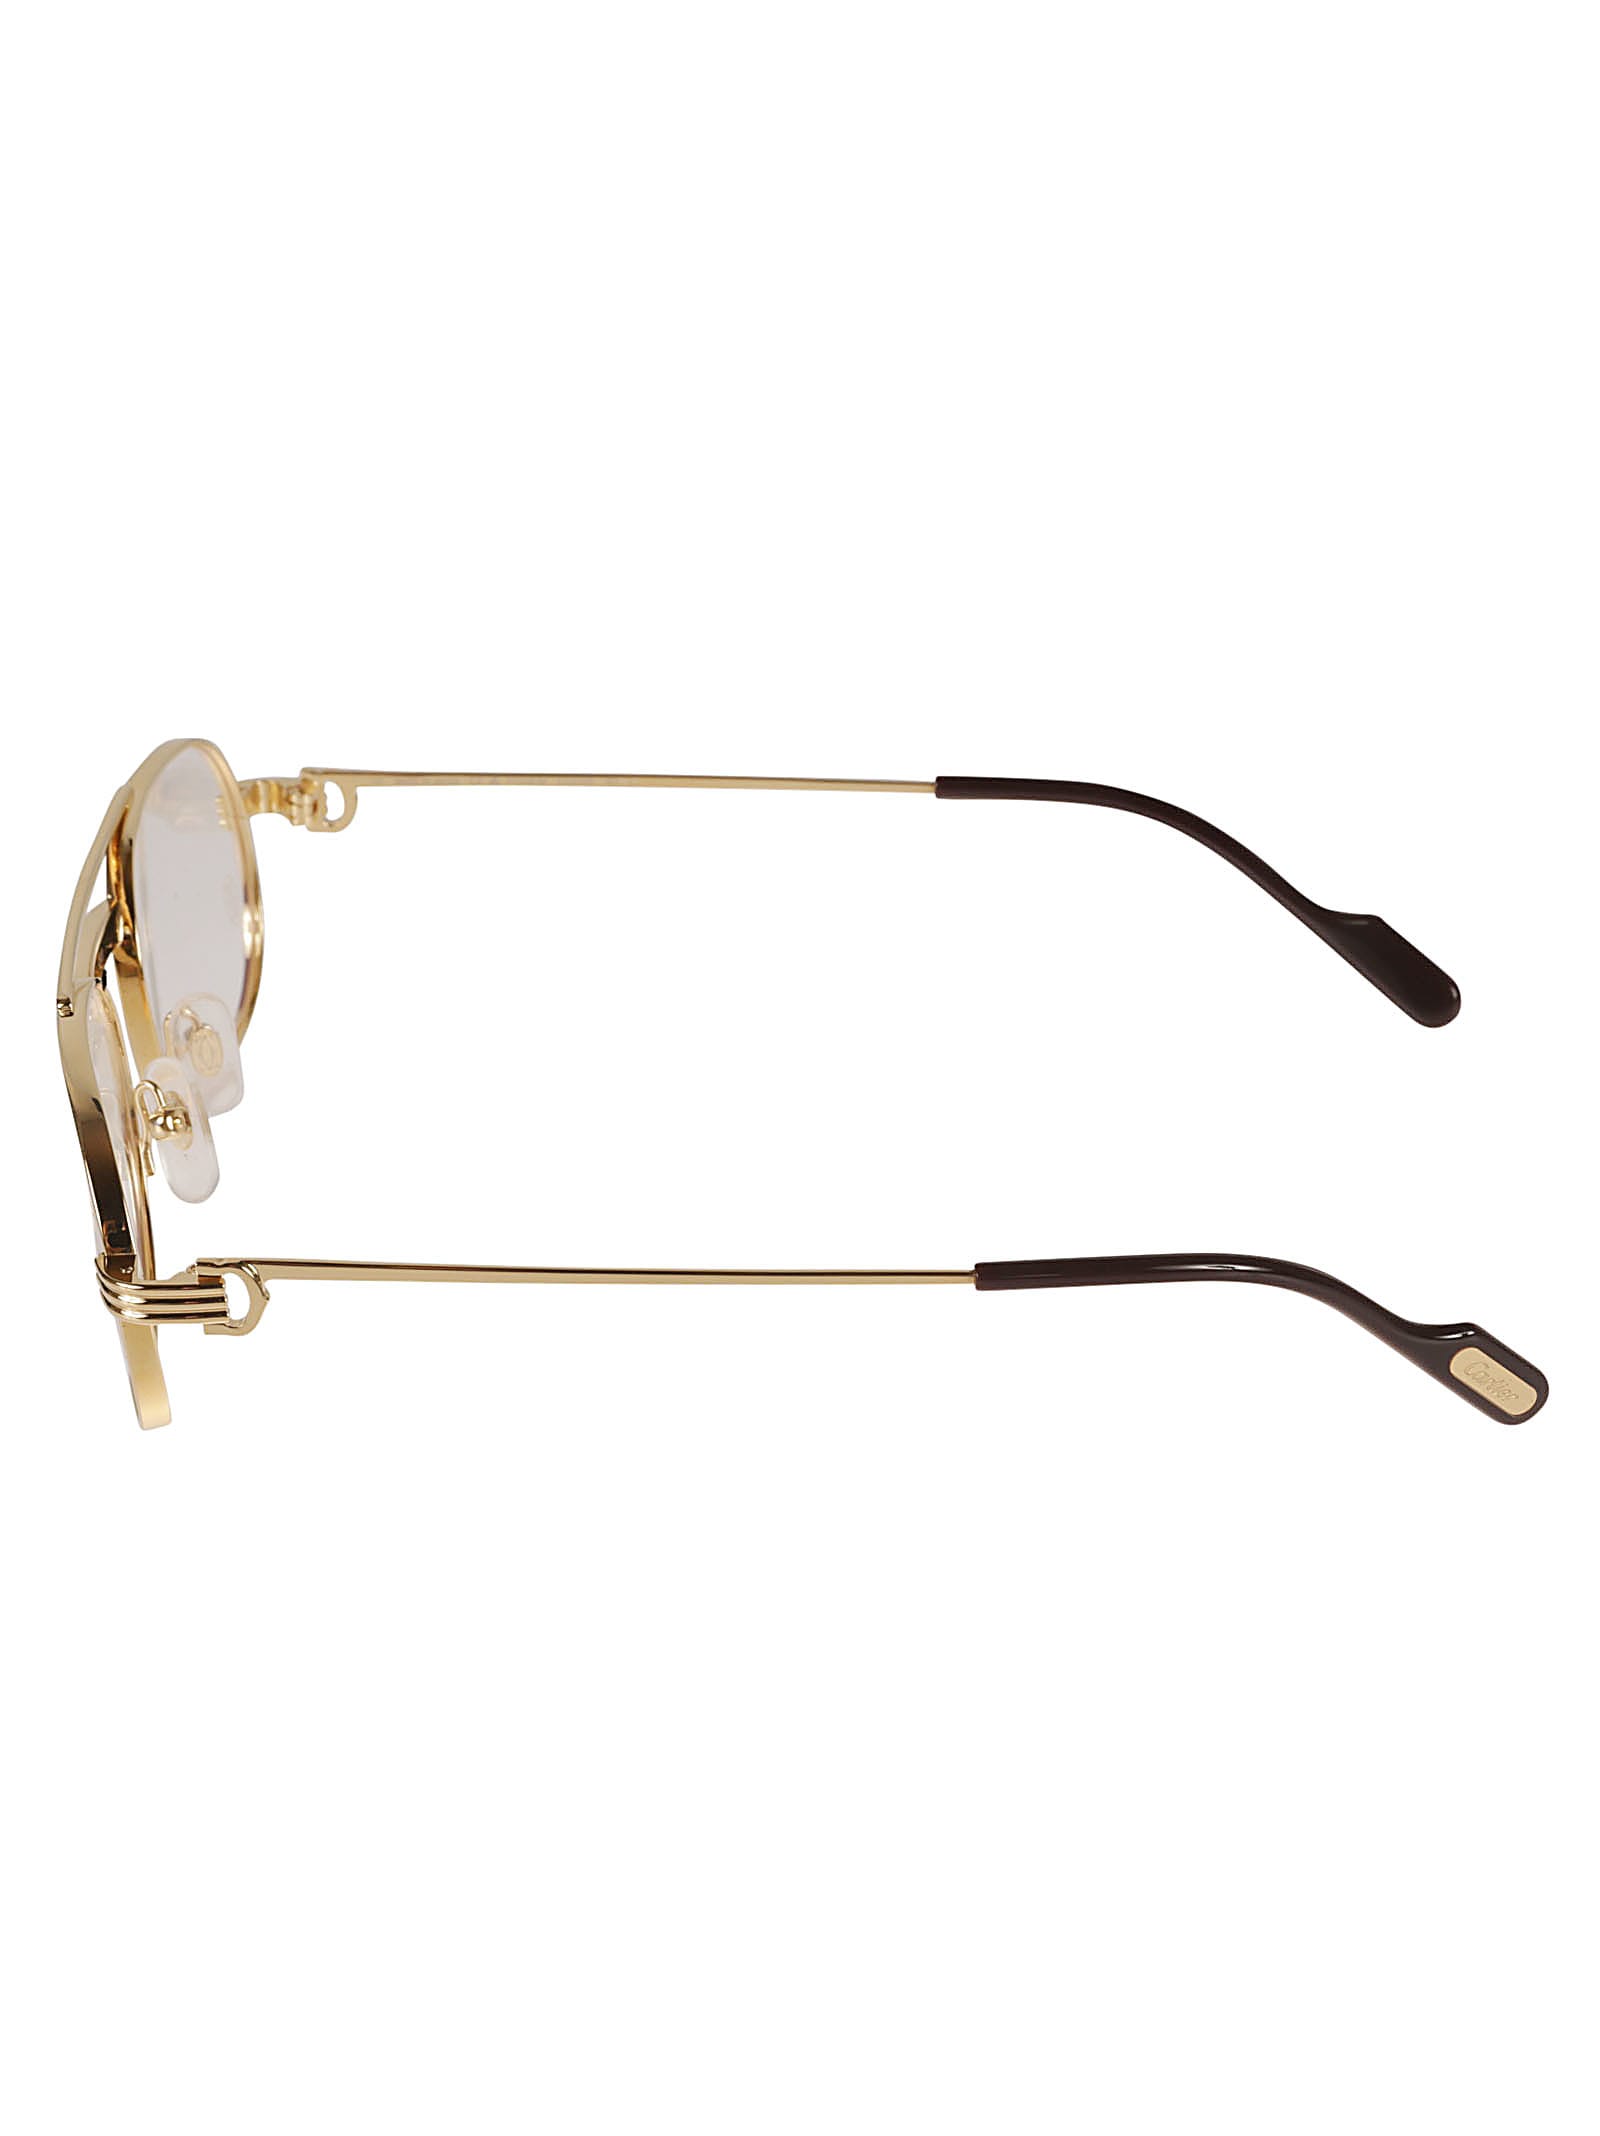 Shop Cartier Aviator Oval Frame In Gold